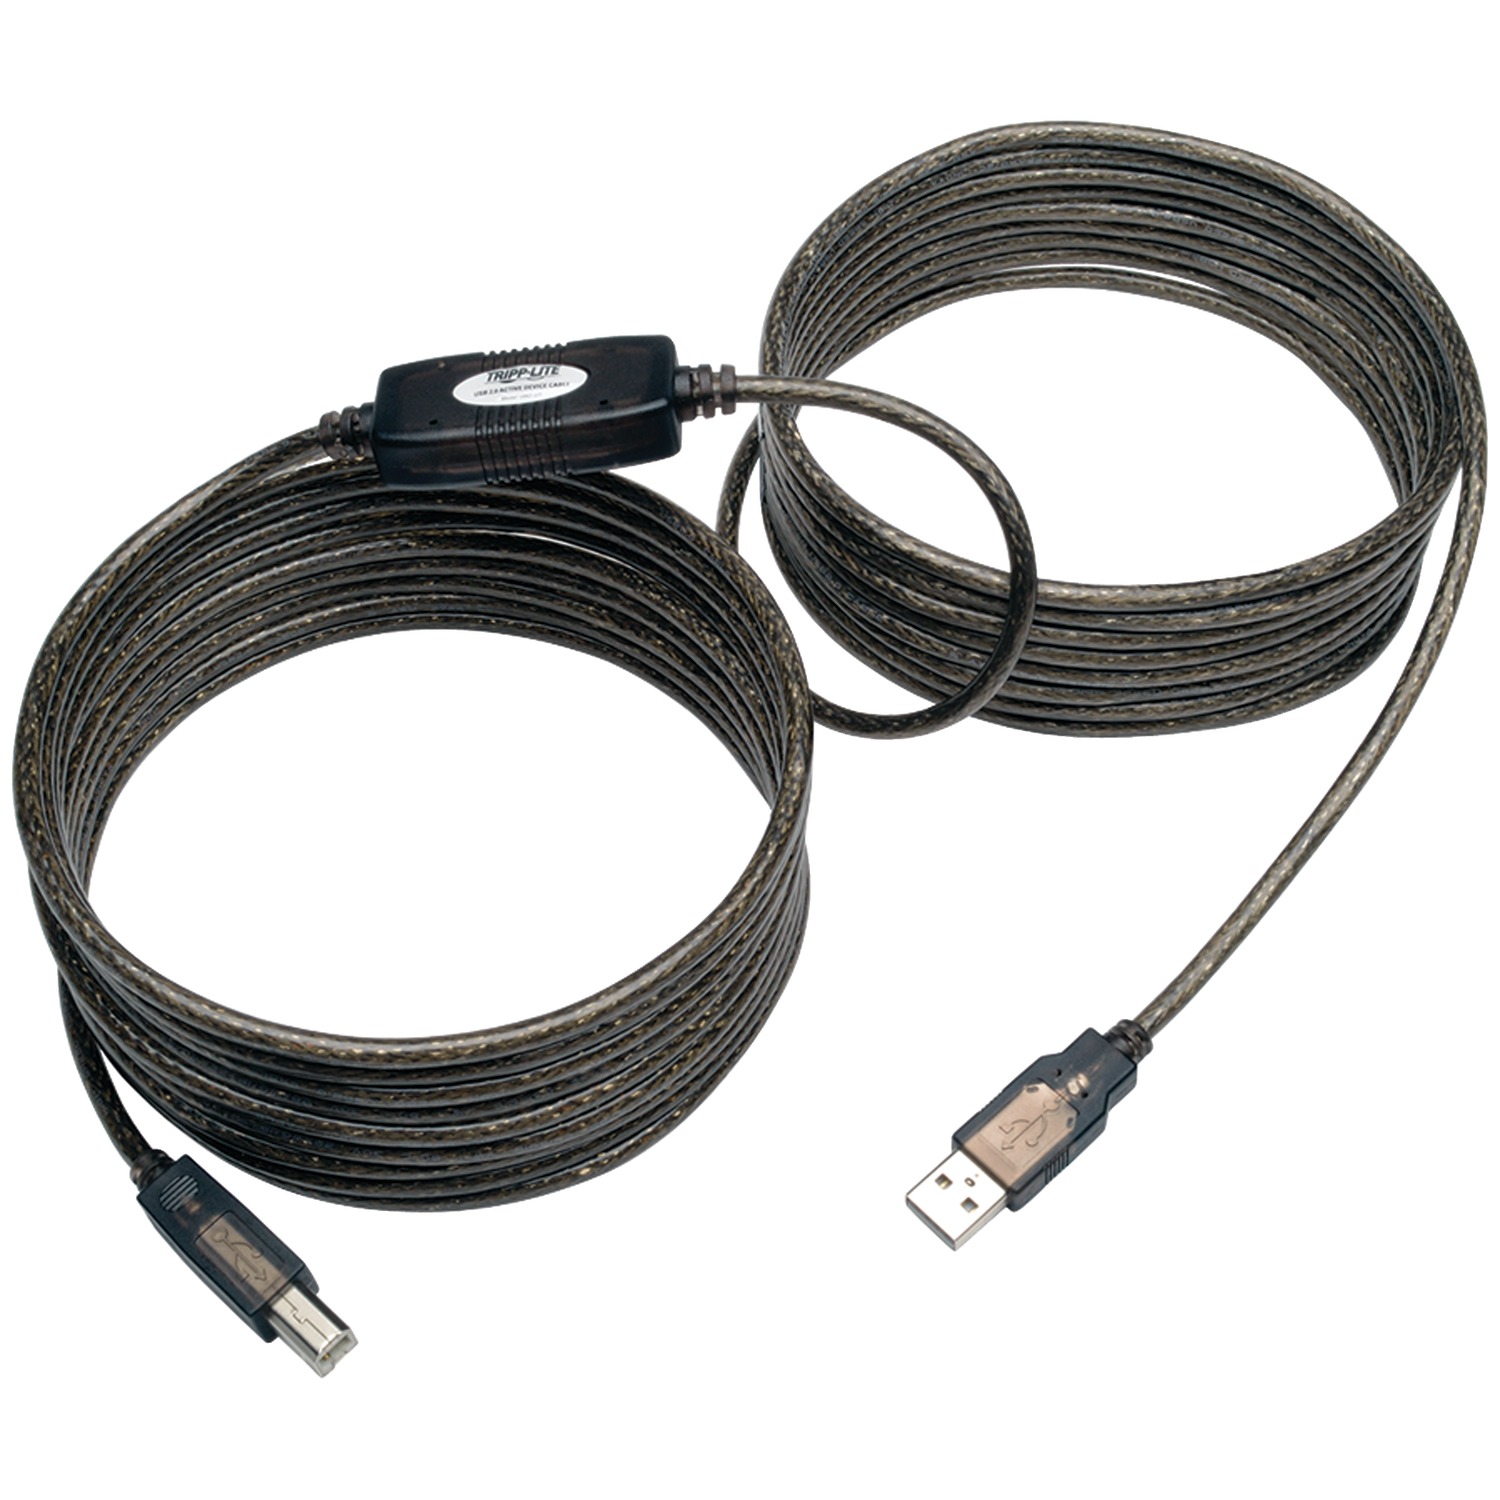 Tripp Lite U042-025 2.0 Hi-speed A/b Active Repeater Cable, 25ft - image 1 of 1